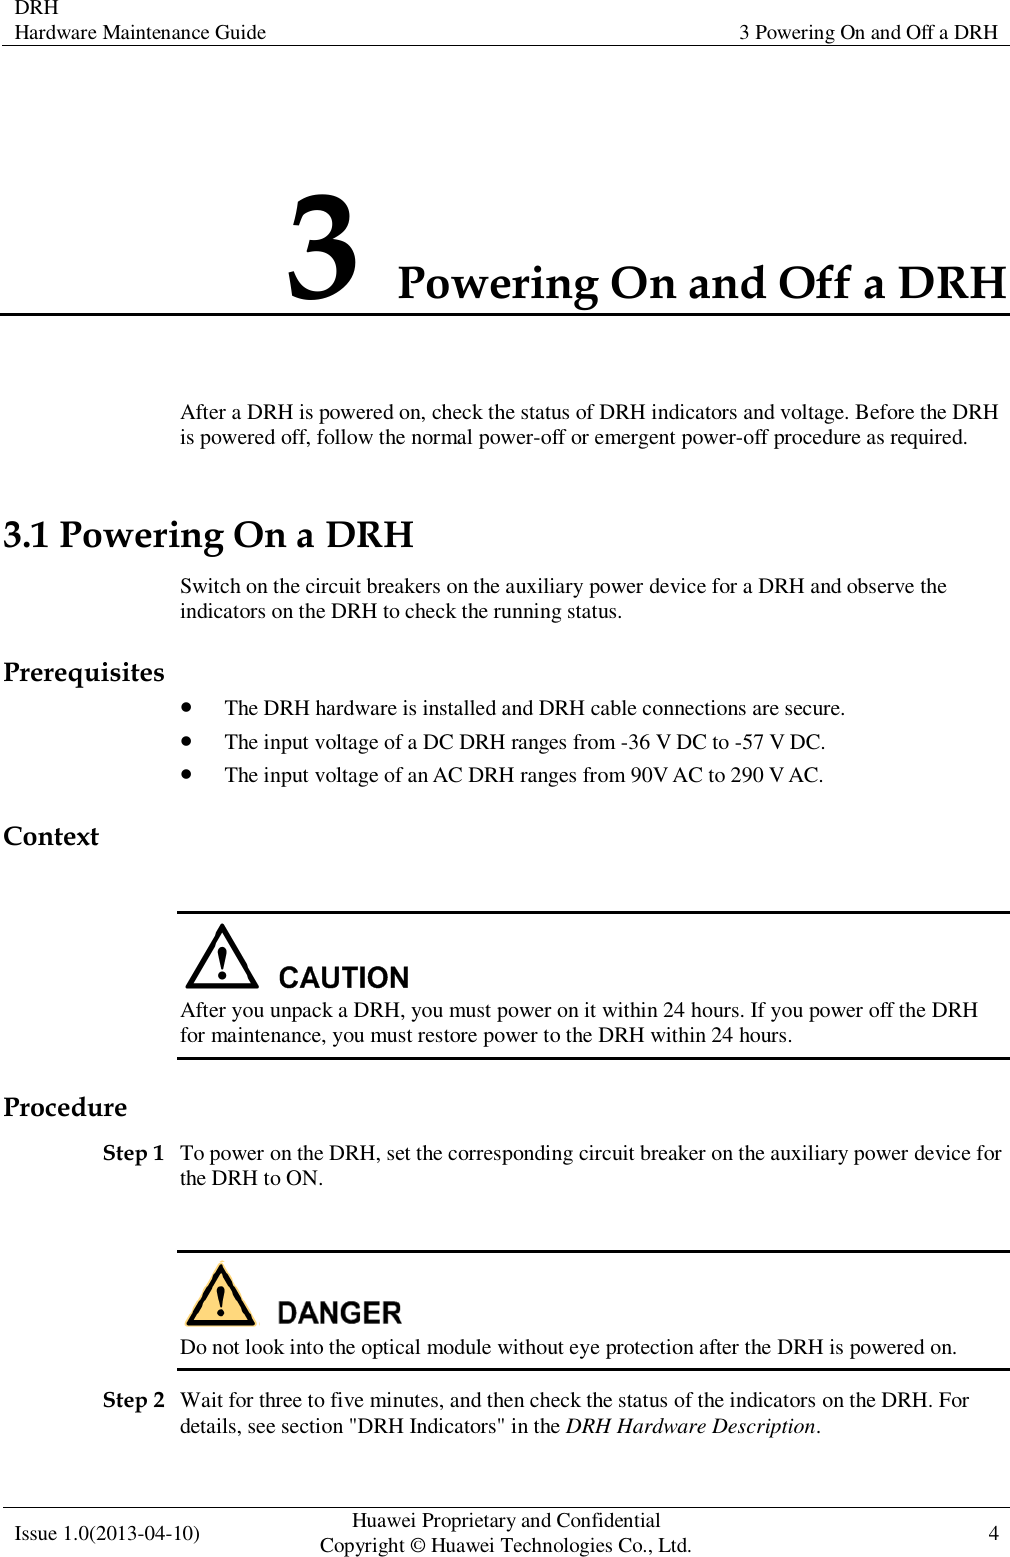  DRH Hardware Maintenance Guide   3 Powering On and Off a DRH  Issue 1.0(2013-04-10) Huawei Proprietary and Confidential                                     Copyright © Huawei Technologies Co., Ltd. 4    3 Powering On and Off a DRH After a DRH is powered on, check the status of DRH indicators and voltage. Before the DRH is powered off, follow the normal power-off or emergent power-off procedure as required. 3.1 Powering On a DRH Switch on the circuit breakers on the auxiliary power device for a DRH and observe the indicators on the DRH to check the running status. Prerequisites  The DRH hardware is installed and DRH cable connections are secure.  The input voltage of a DC DRH ranges from -36 V DC to -57 V DC.  The input voltage of an AC DRH ranges from 90V AC to 290 V AC. Context   After you unpack a DRH, you must power on it within 24 hours. If you power off the DRH for maintenance, you must restore power to the DRH within 24 hours. Procedure Step 1 To power on the DRH, set the corresponding circuit breaker on the auxiliary power device for the DRH to ON.   Do not look into the optical module without eye protection after the DRH is powered on. Step 2 Wait for three to five minutes, and then check the status of the indicators on the DRH. For details, see section &quot;DRH Indicators&quot; in the DRH Hardware Description. 